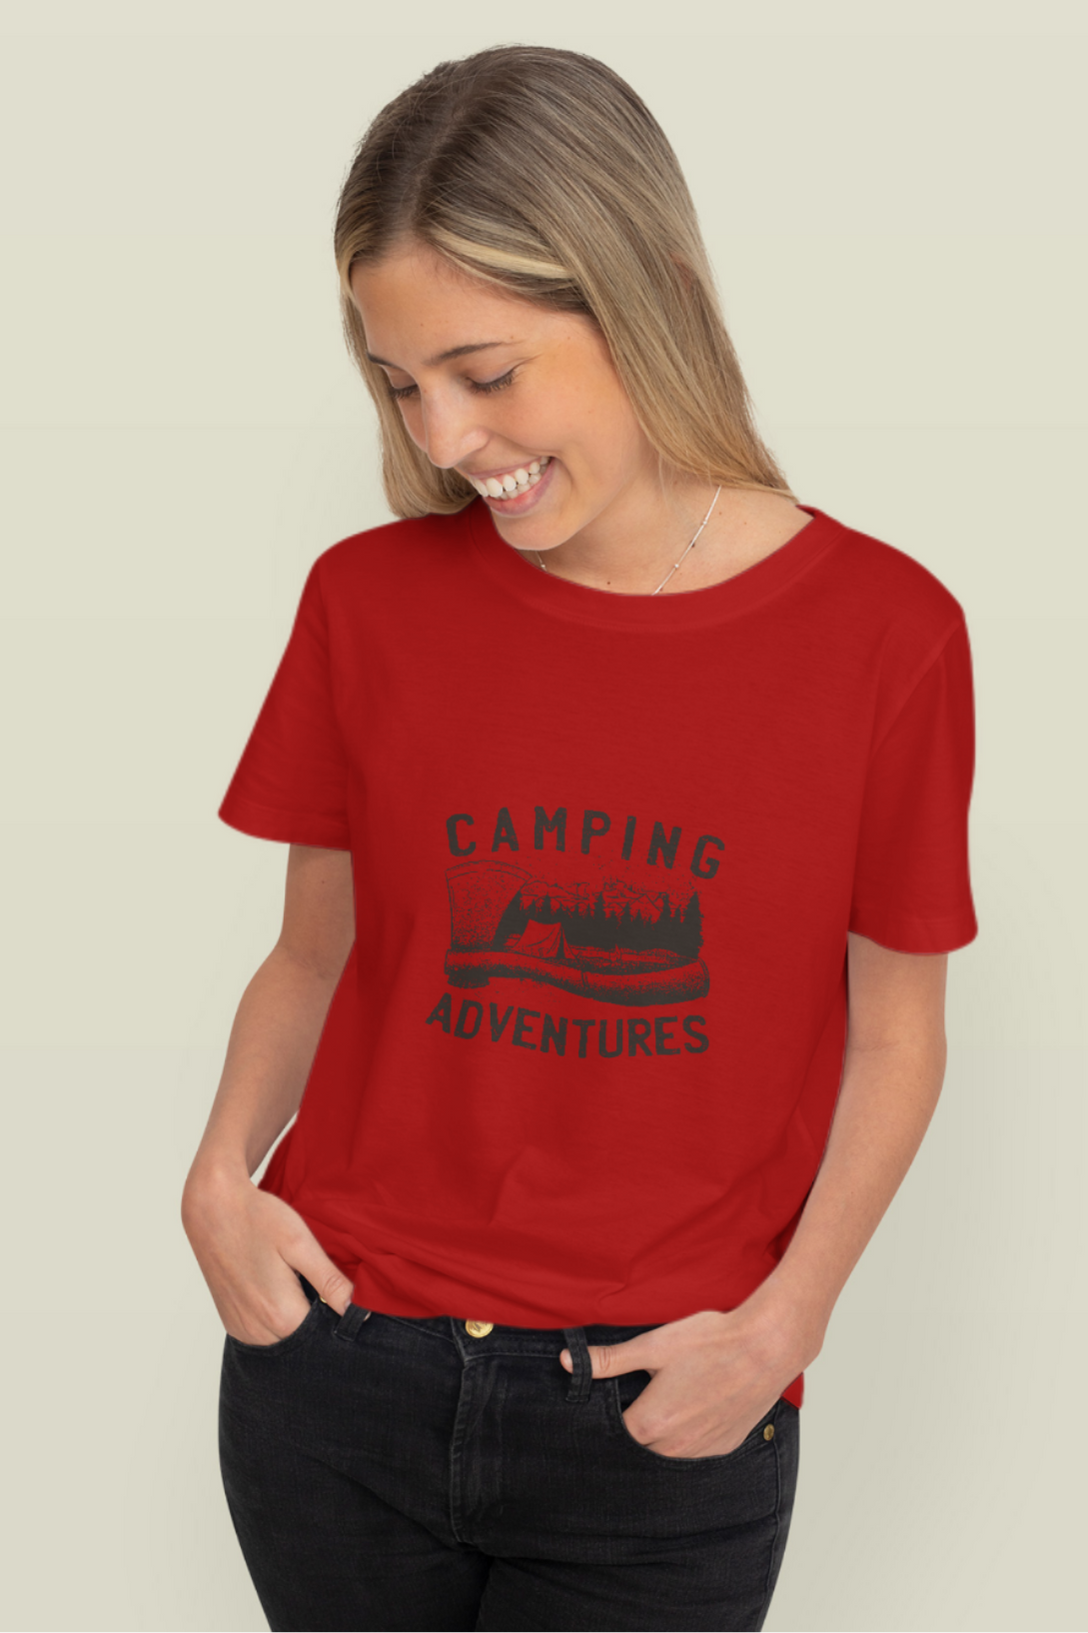 Camping Adventures Printed T-Shirt For Women - WowWaves - 8